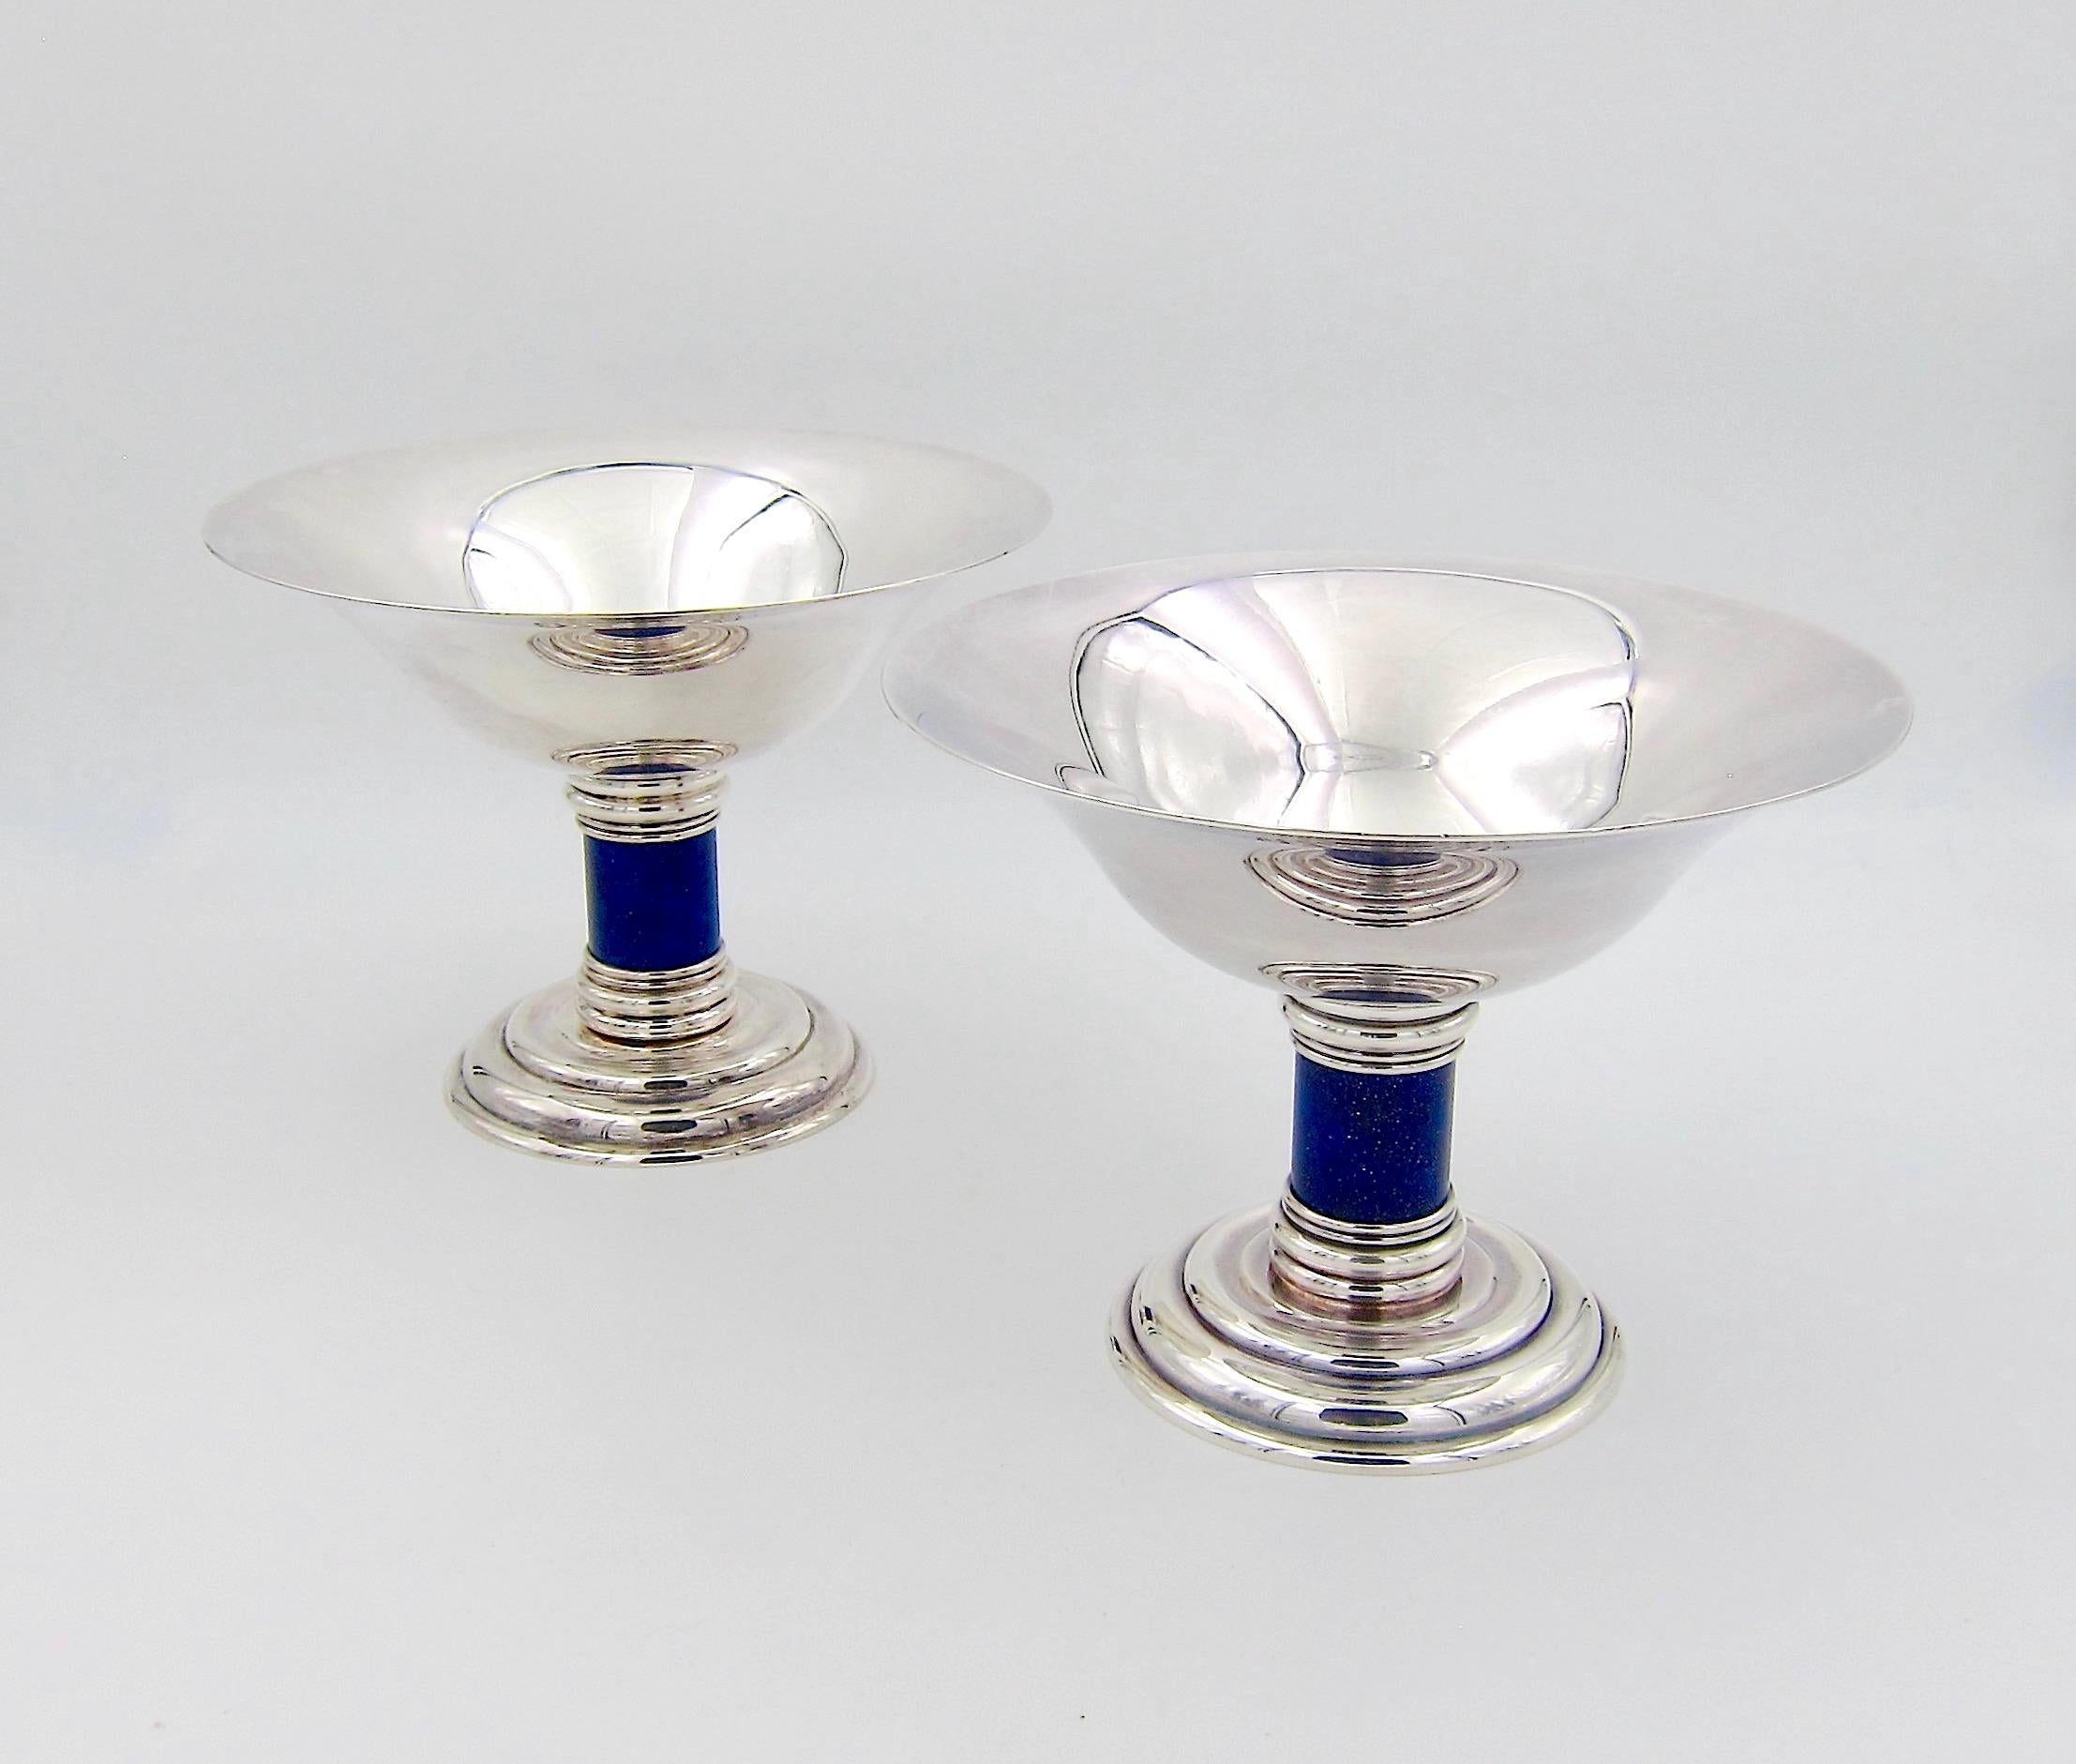 Silvered Puiforcat French Art Deco Flaring Tazza Pair with Faux Lapis Lazuli Stems